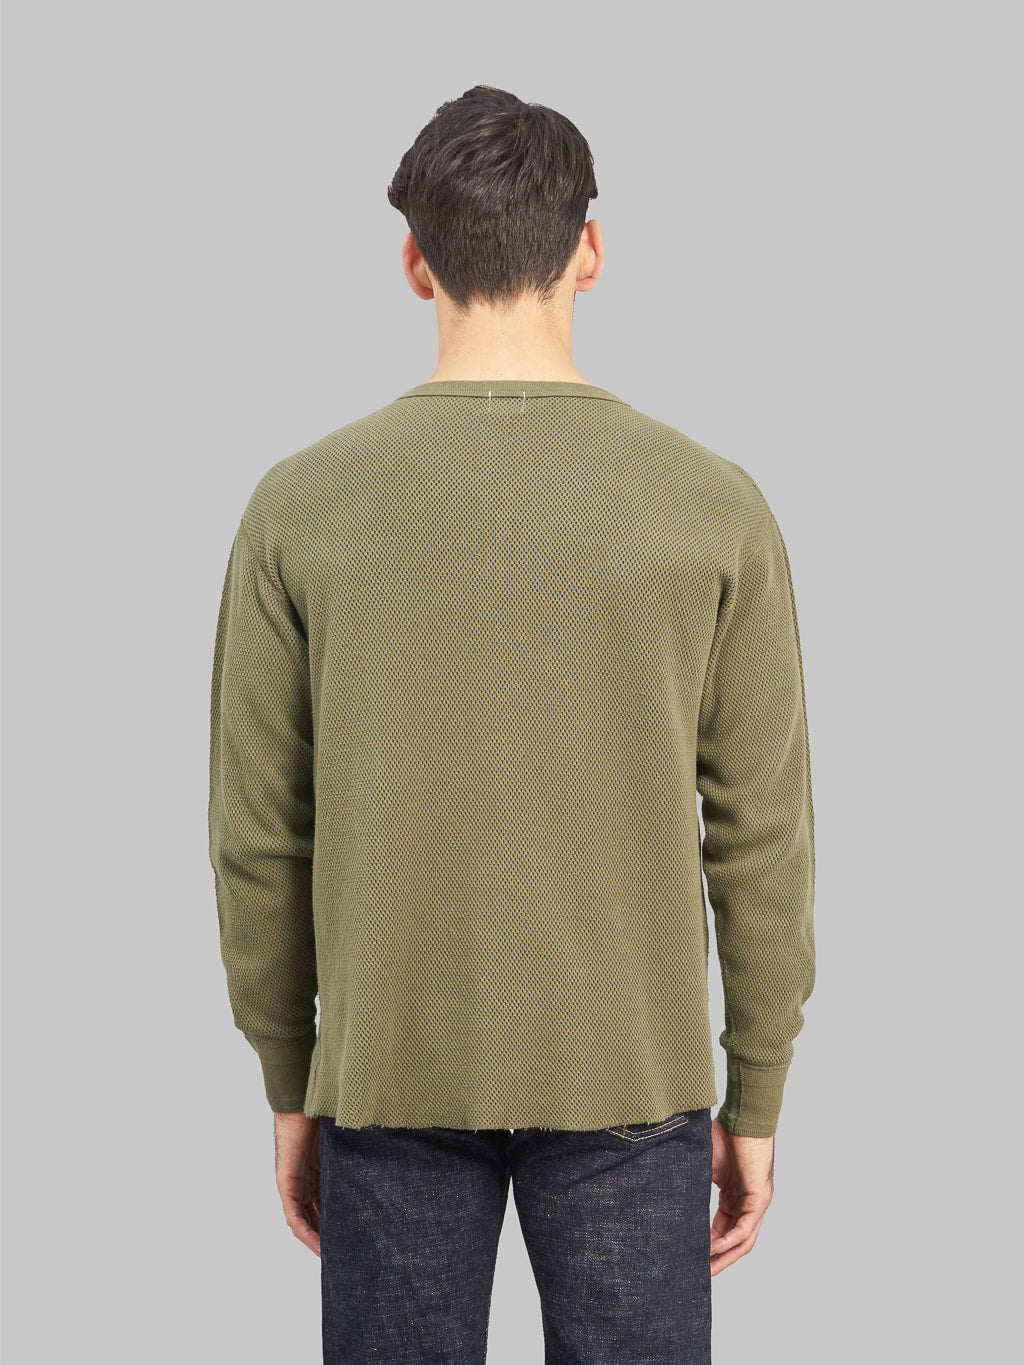 Loop & Weft Double Face Hex Honeycomb Crewneck Thermal Army Olive